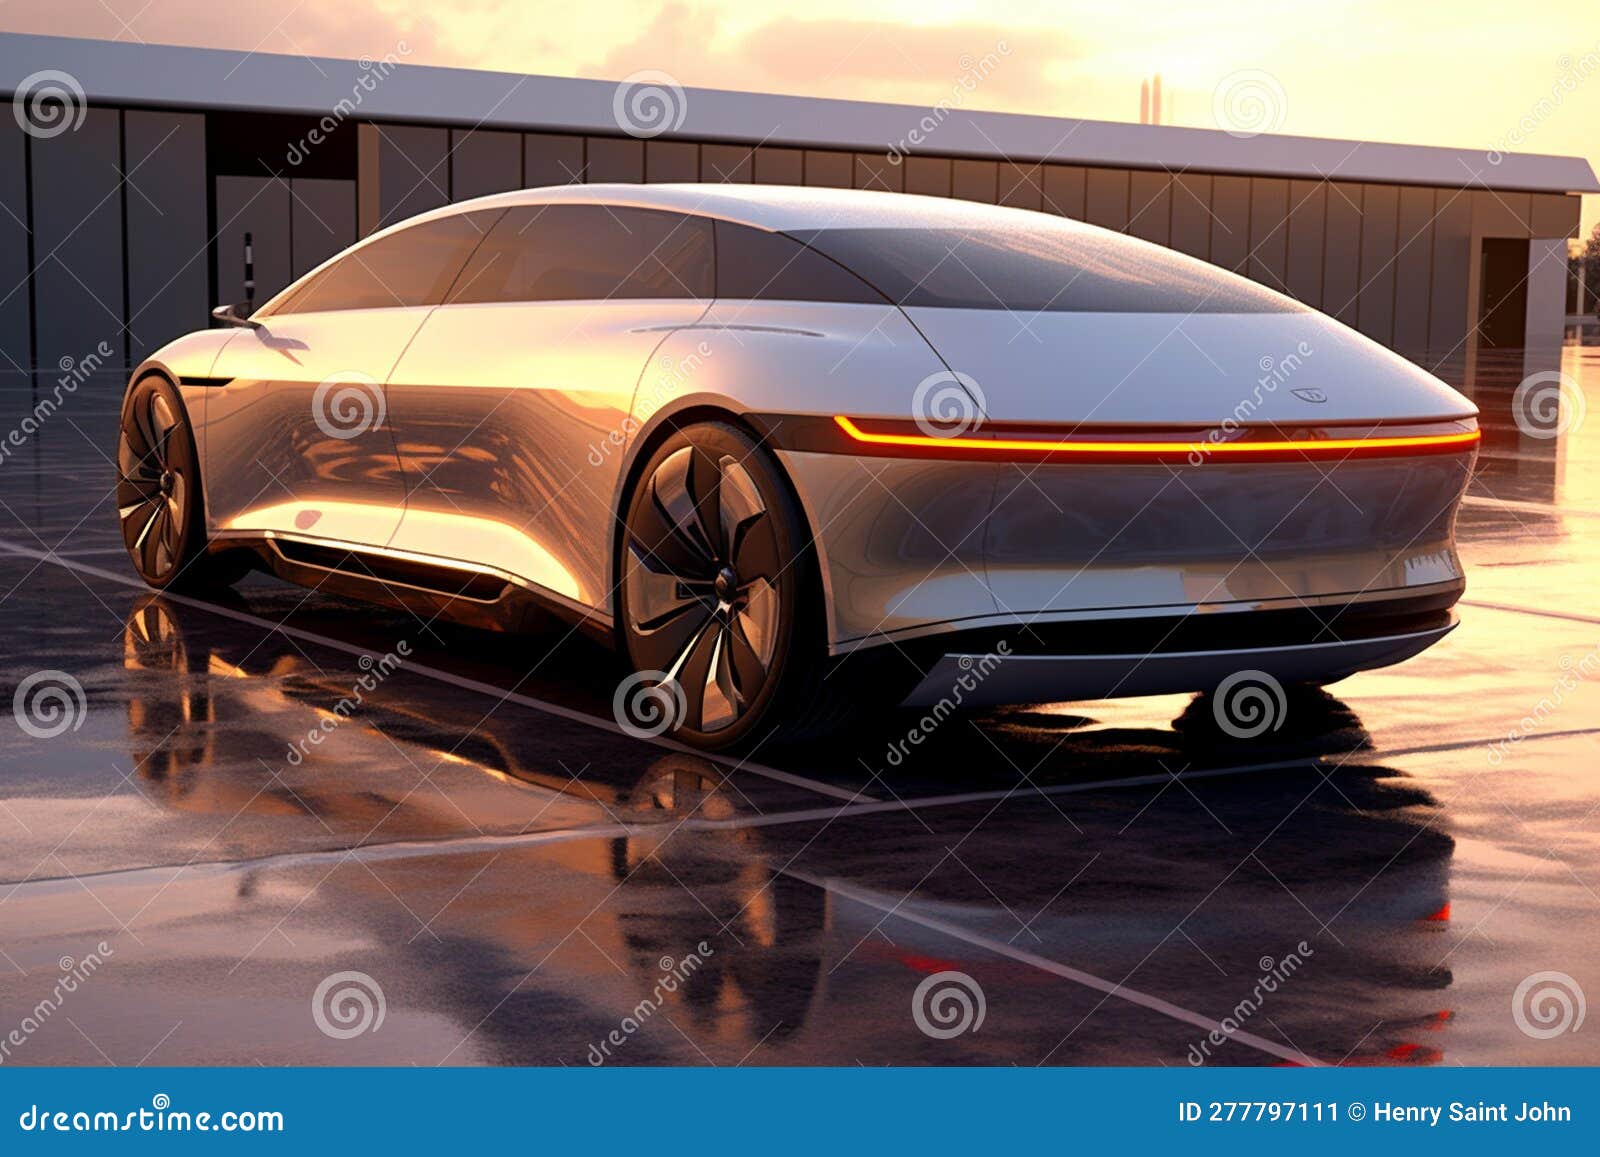 future of mobility: photorealistic renderings of innovative transportation solutions